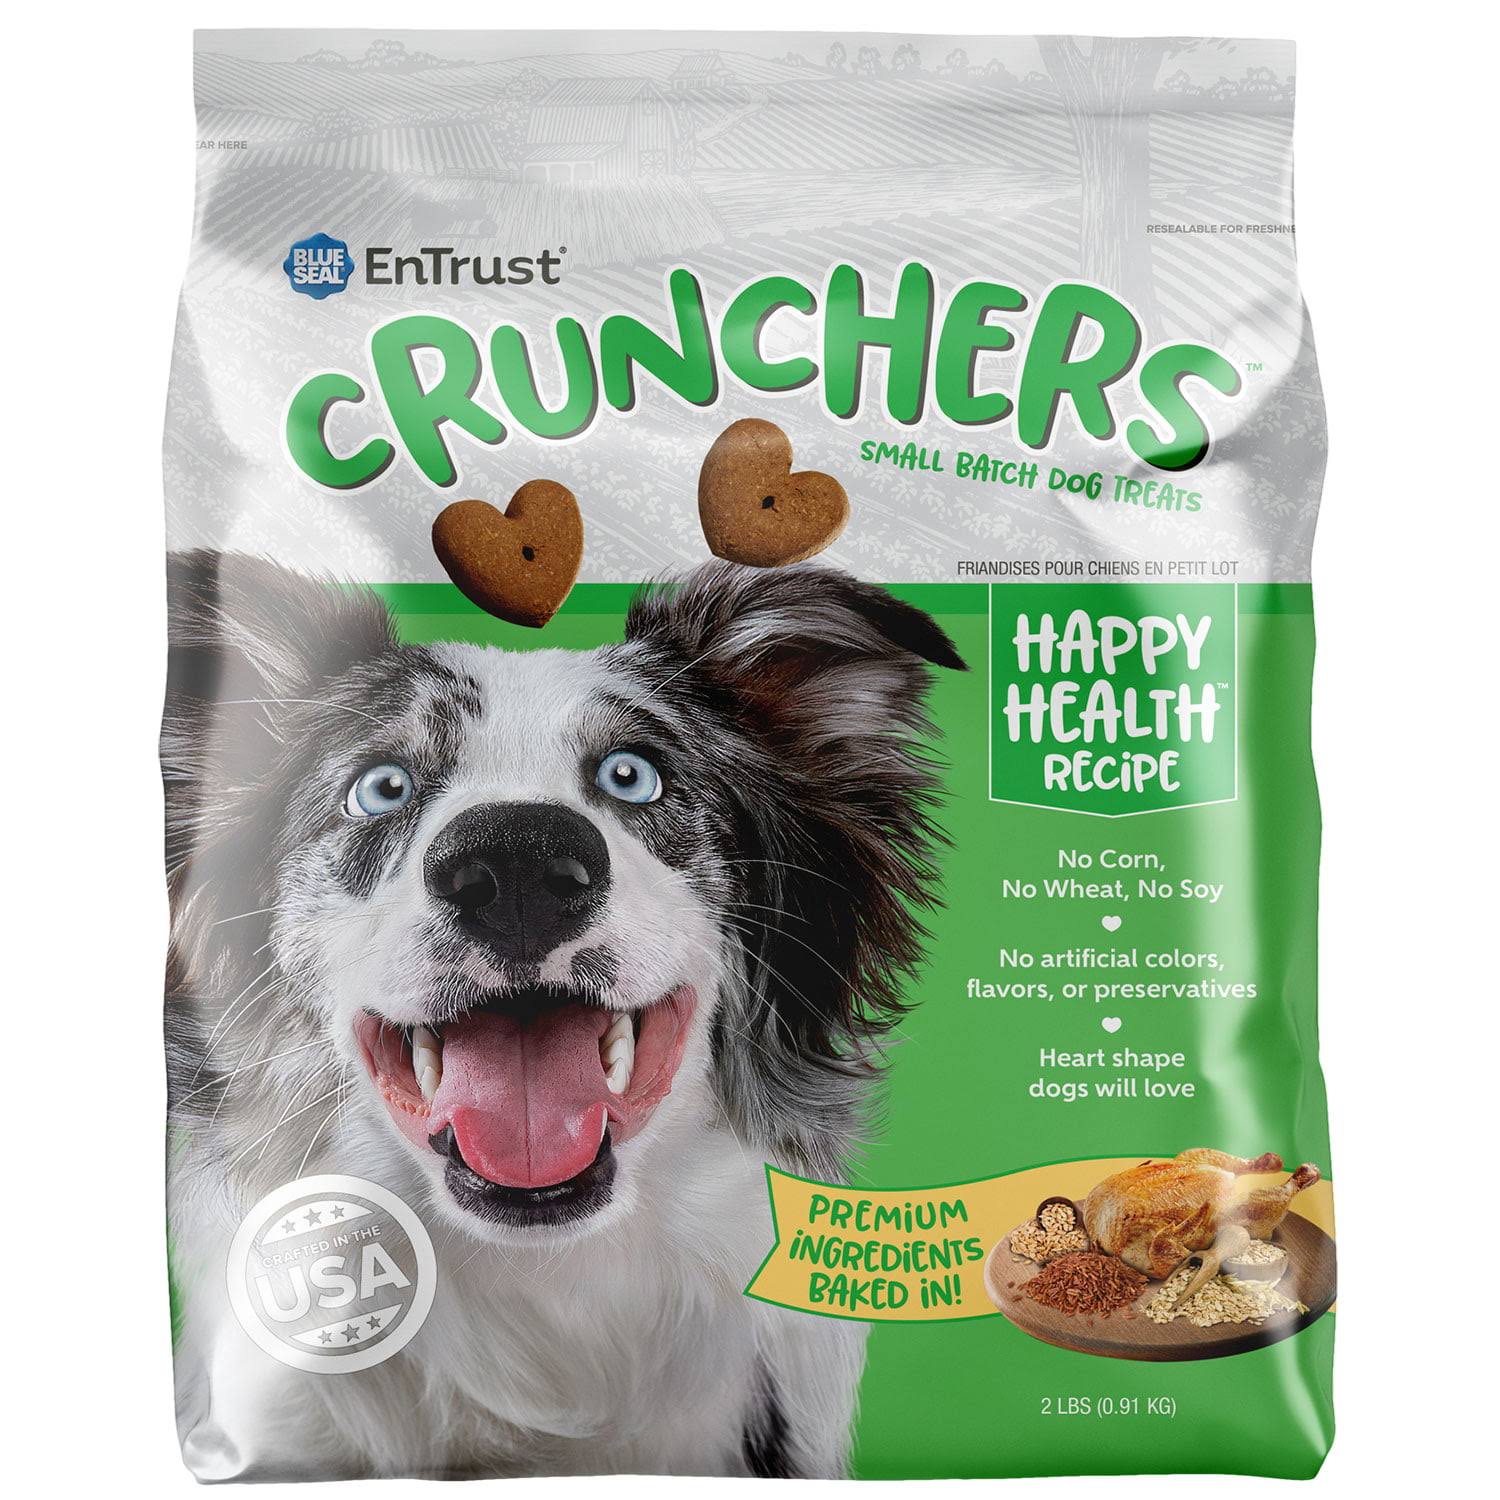 Blue Seal Entrust Crunchers Small Batch Dog Biscuits Treats - Happy Health - 2 lbs